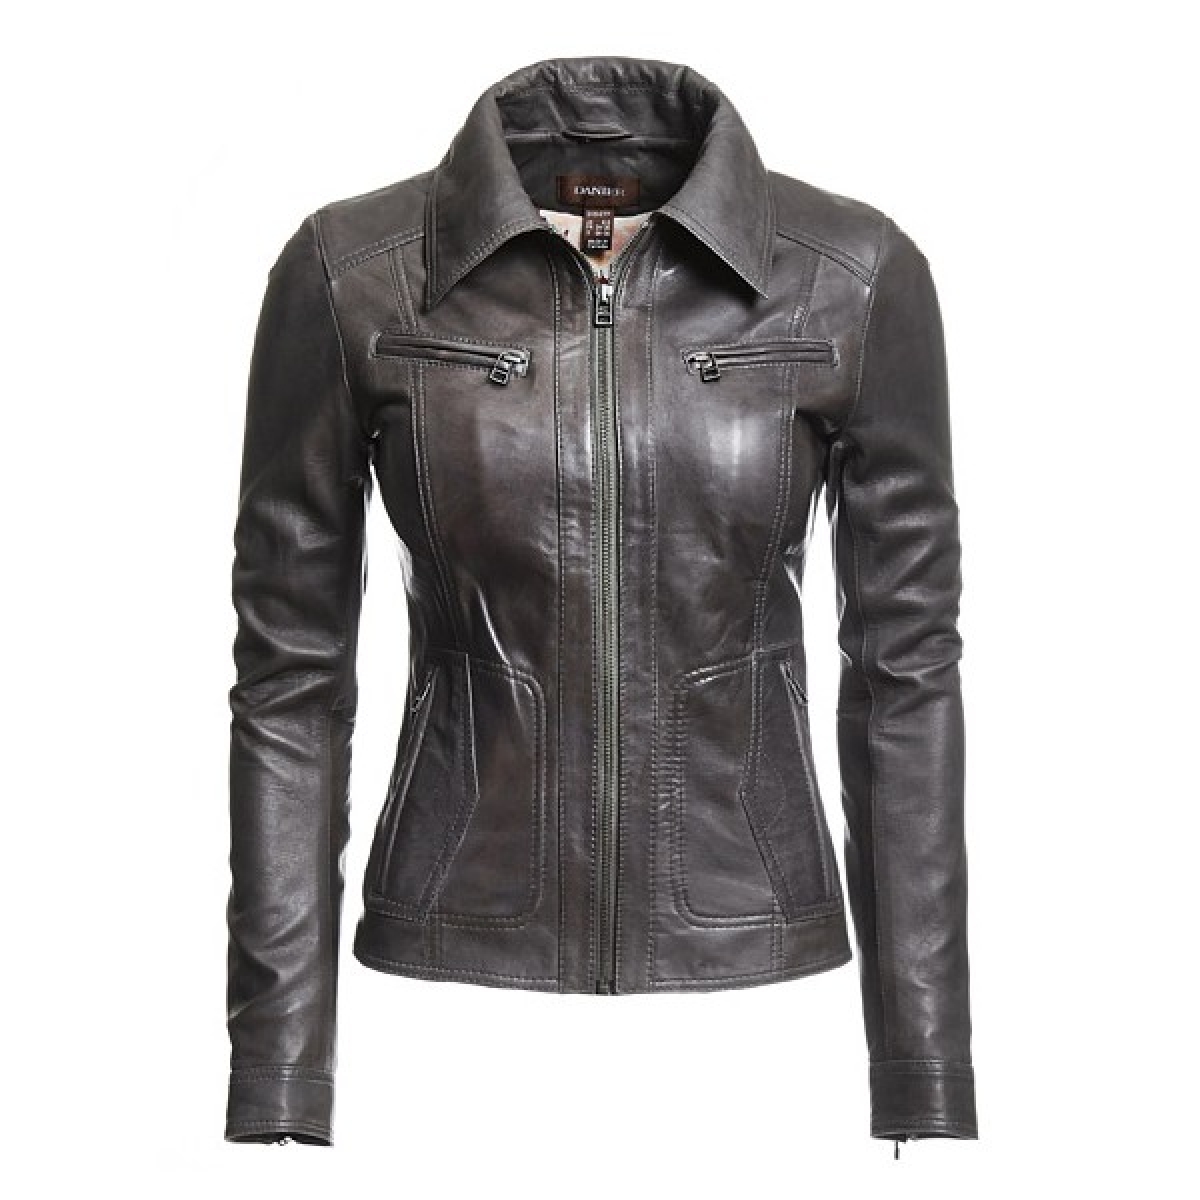 Classic-Collar Jacket - Charcoal black | Leather Jackets | Women's ...